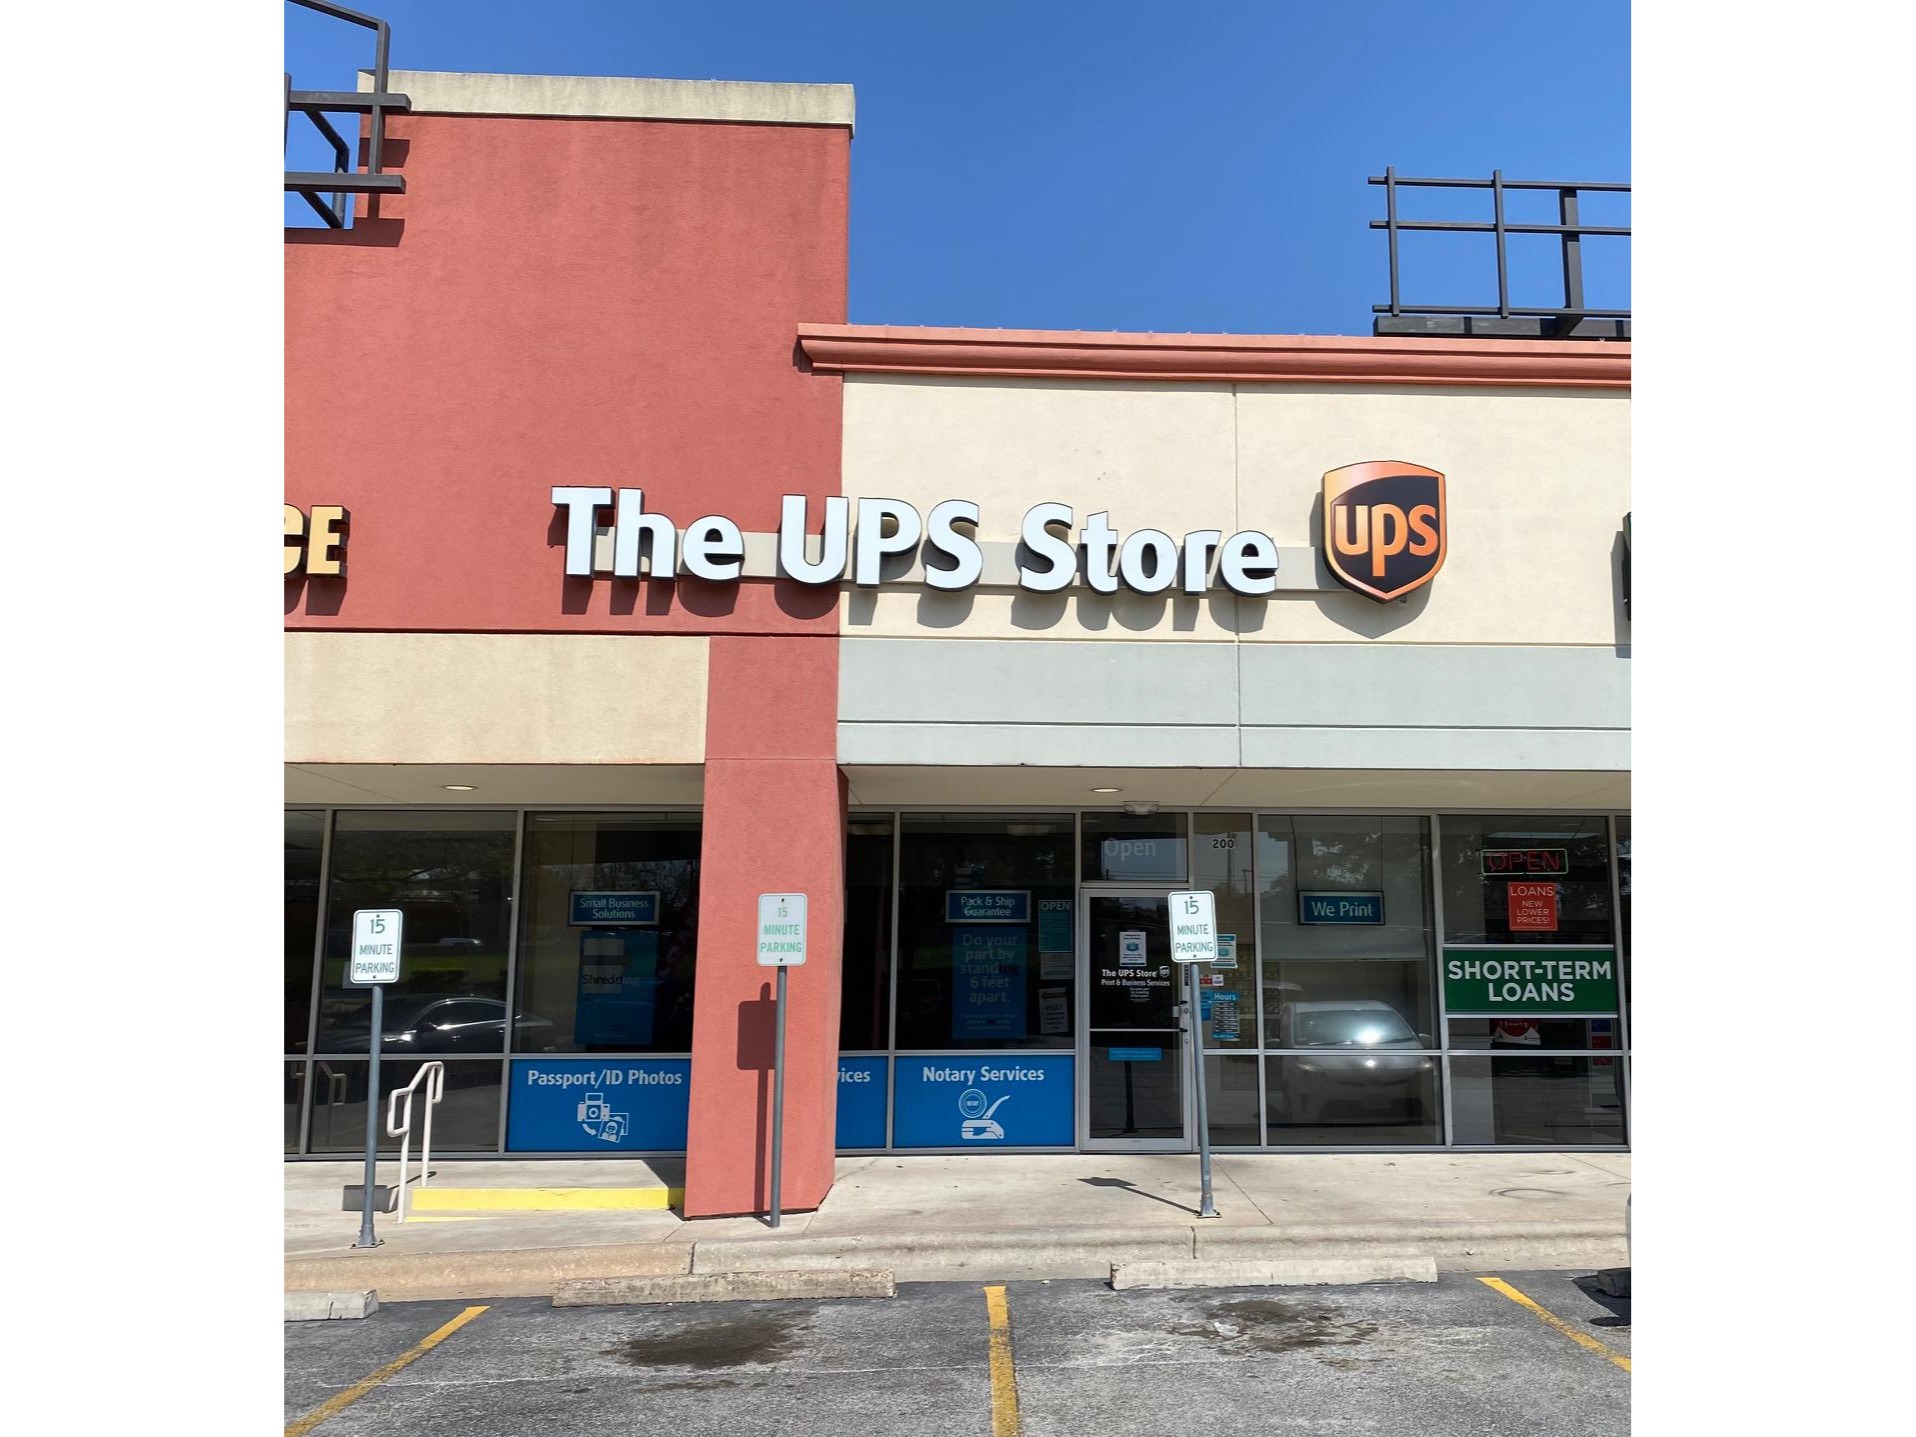 Facade of The UPS Store Round Rock